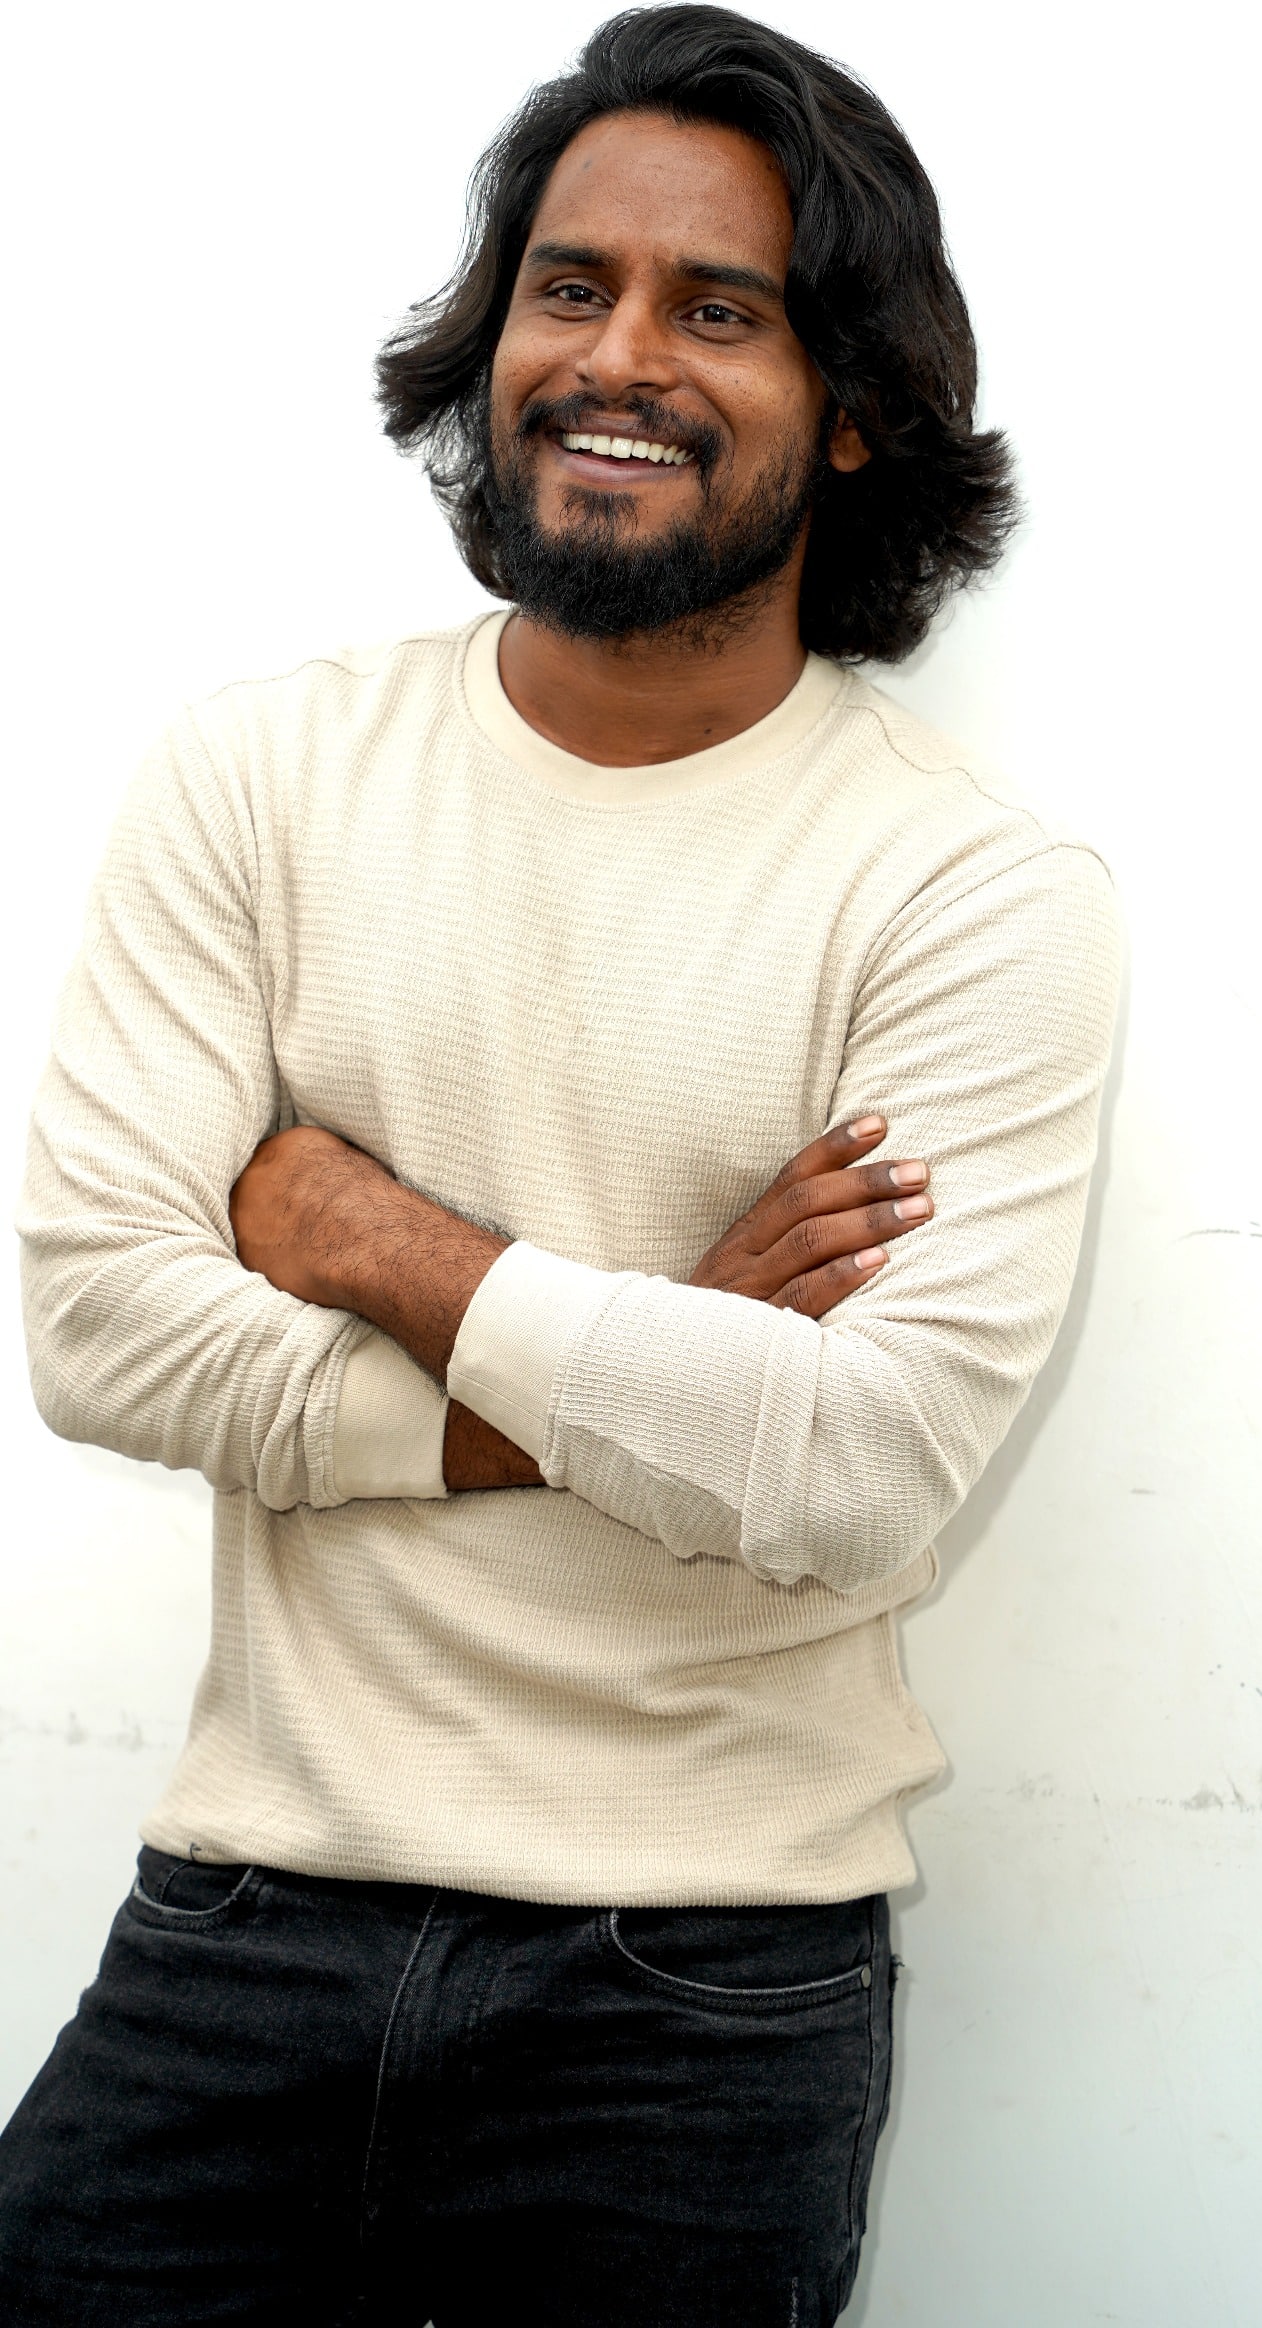 Naveen is a boxer in the film